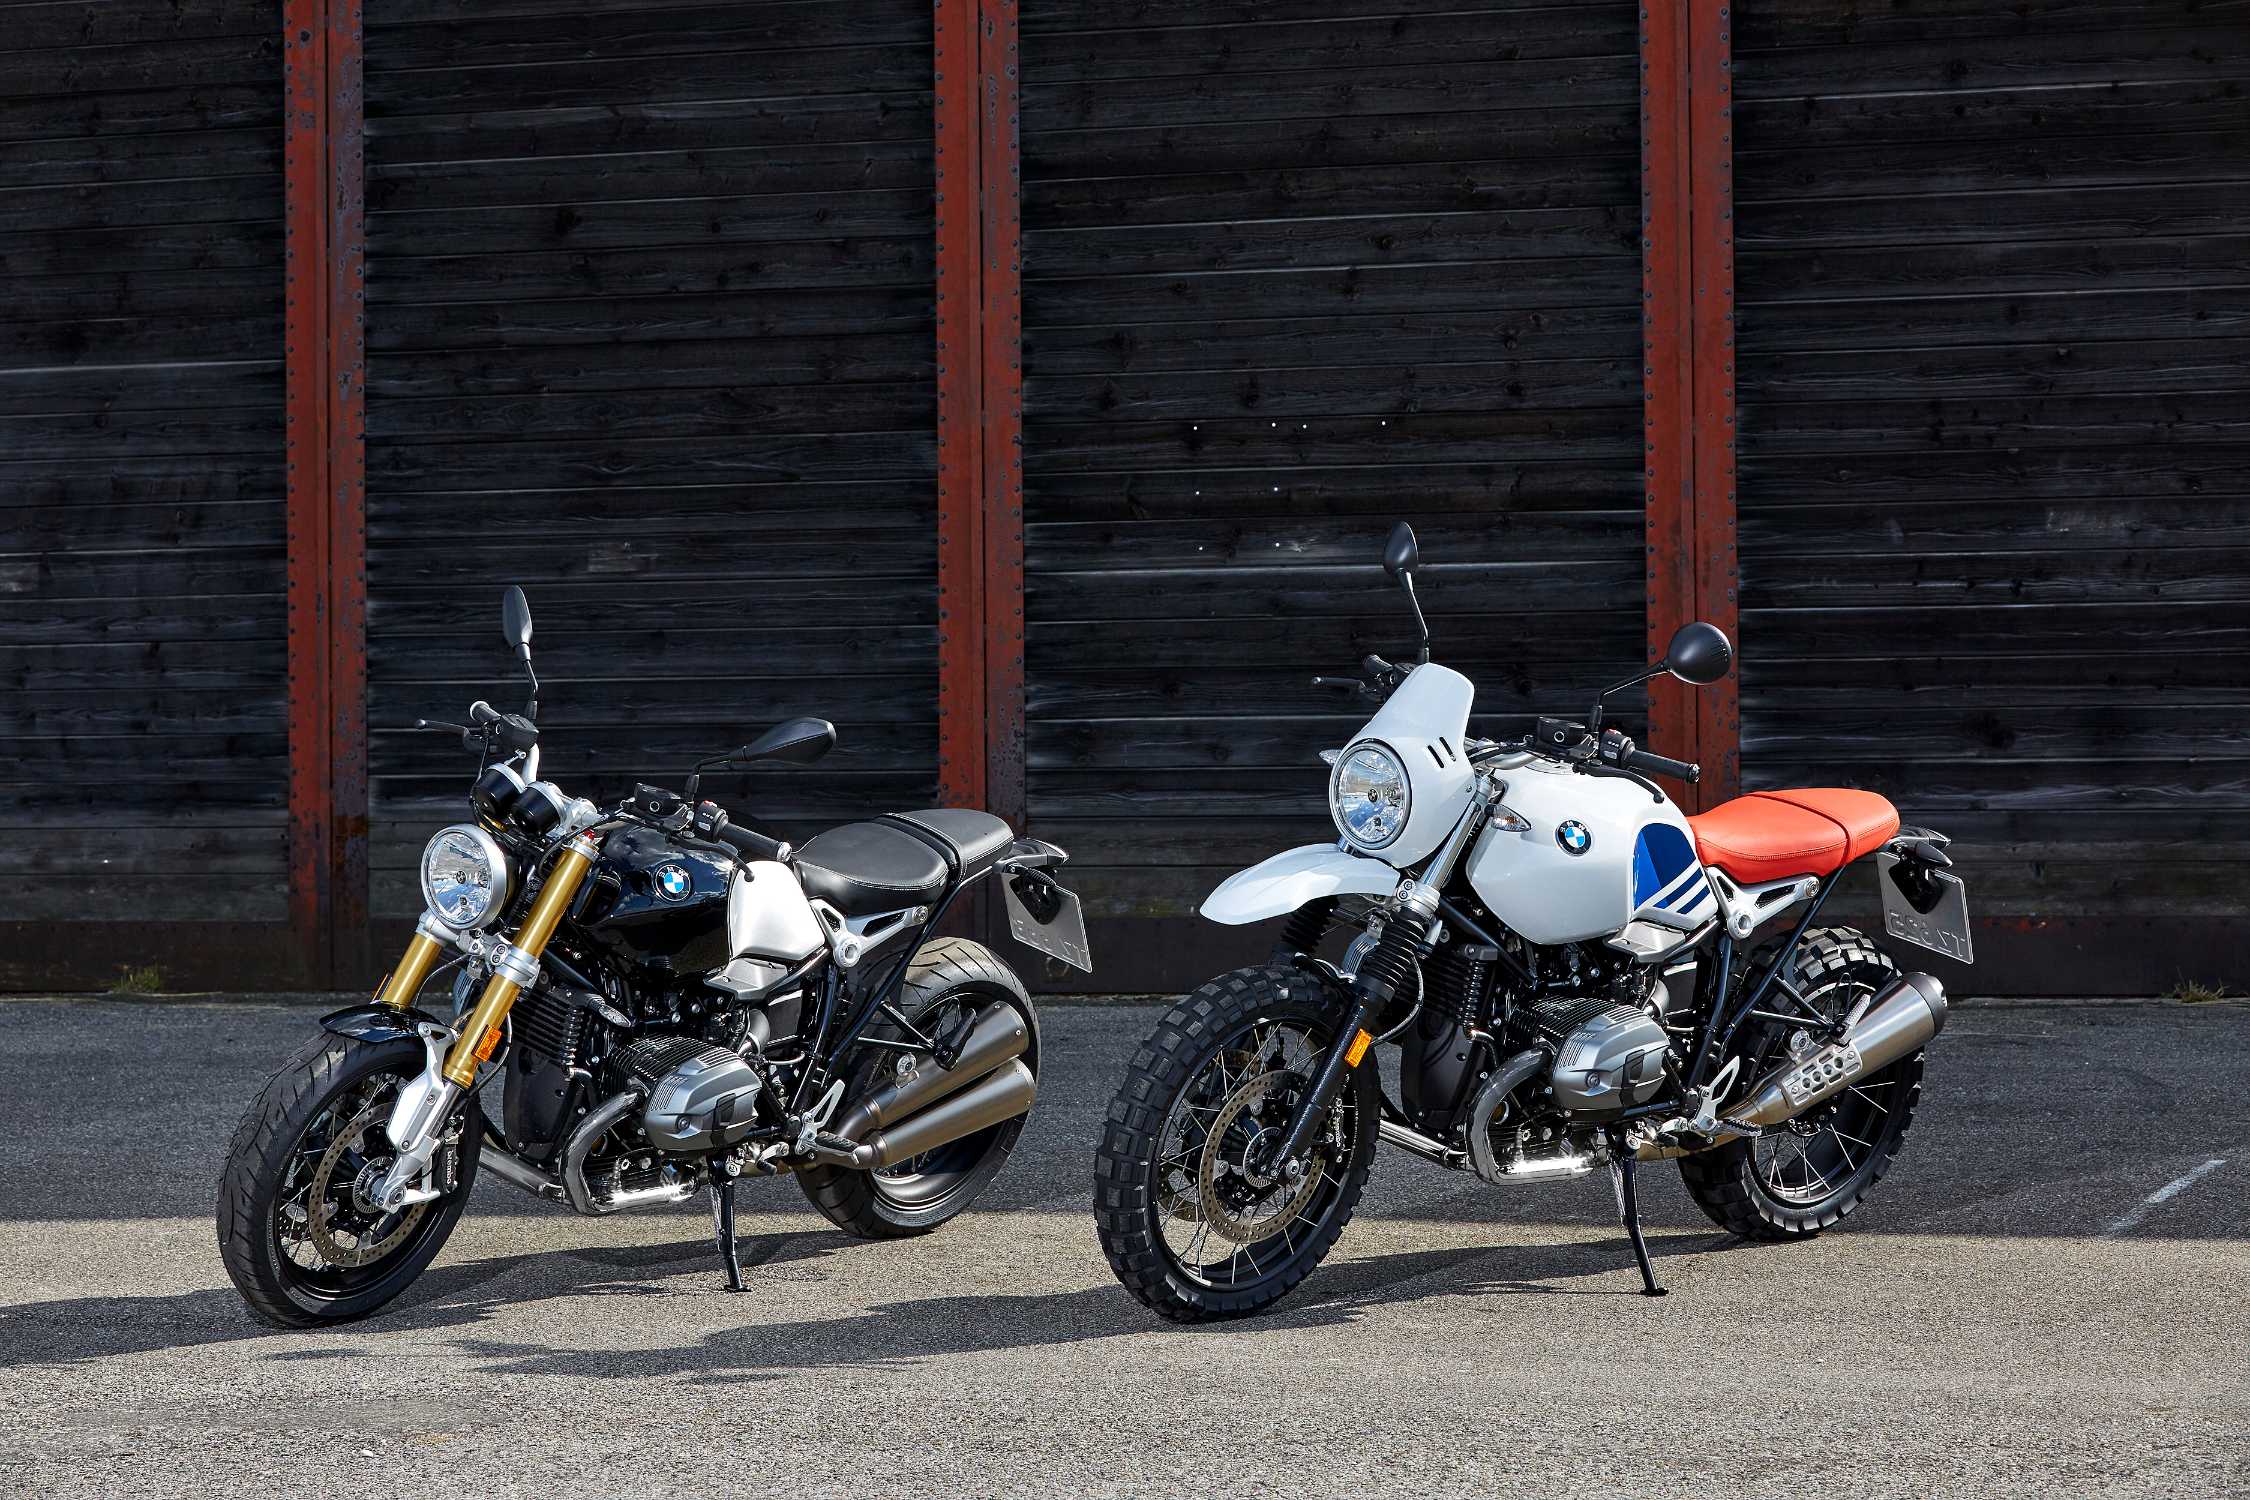 The New Bmw R Ninet And R Ninet Urban G S